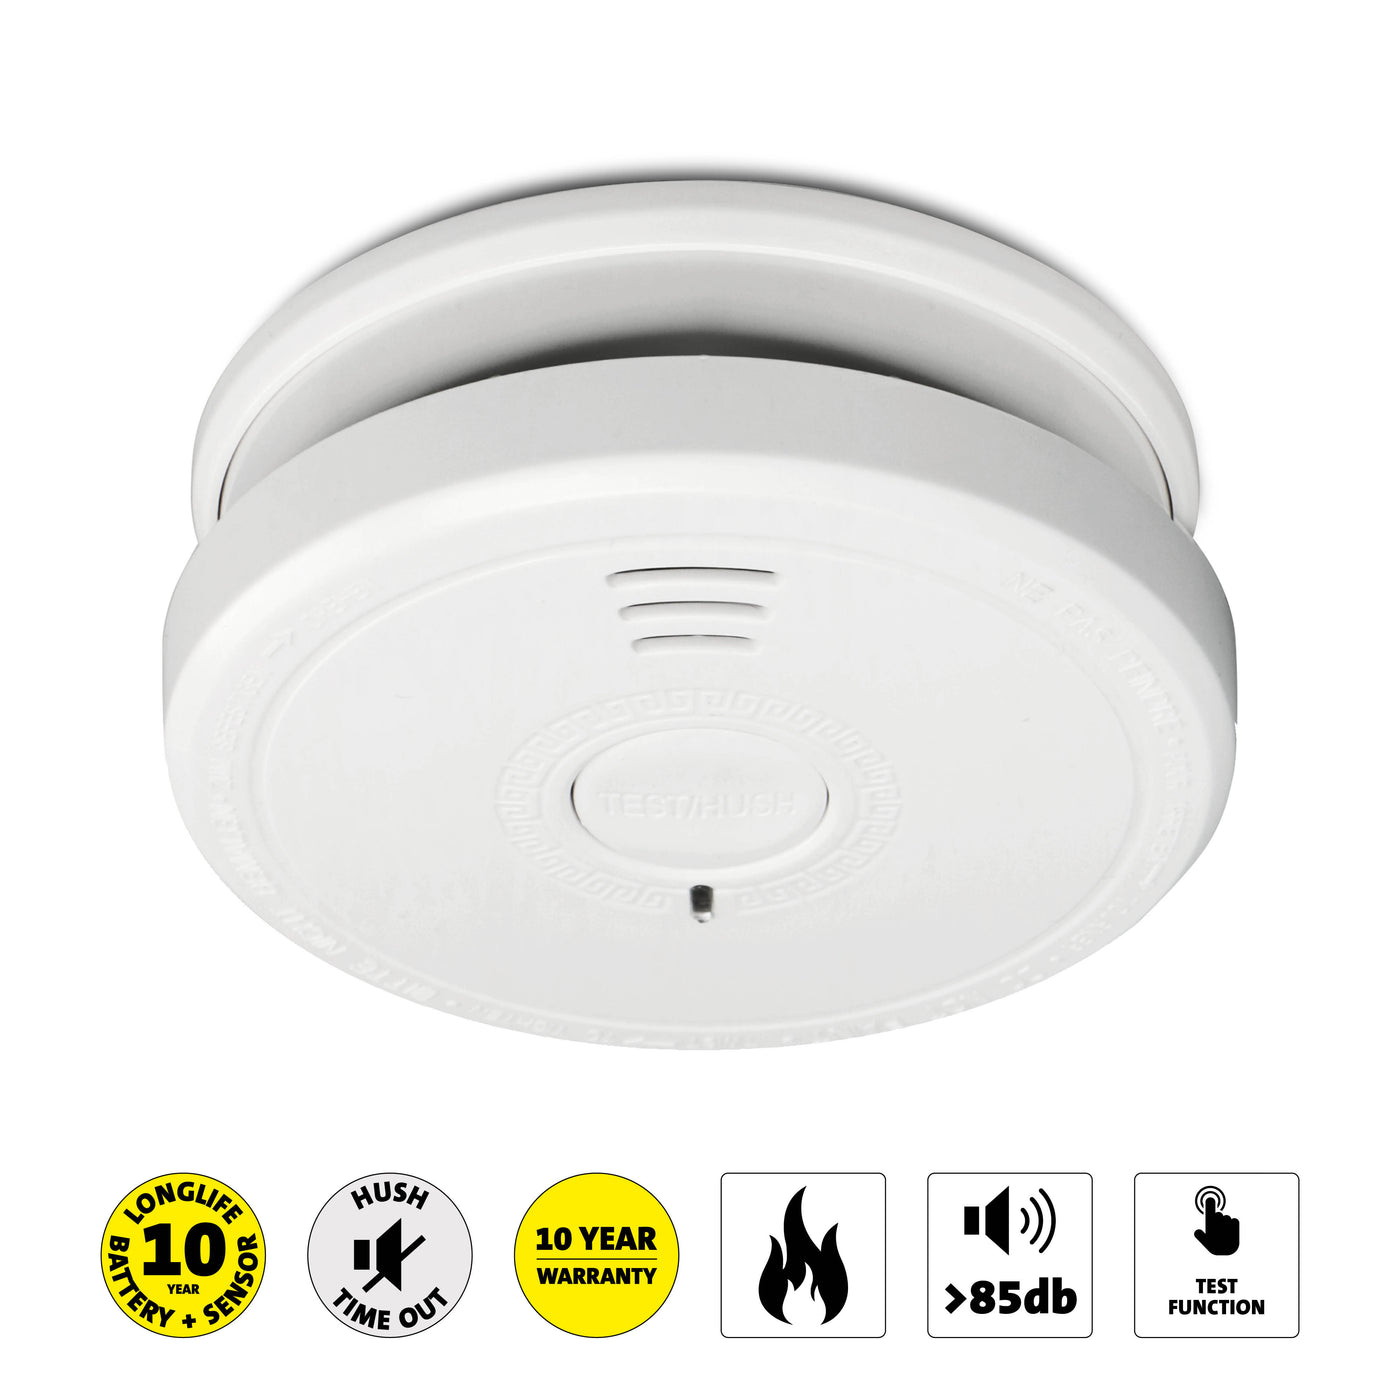 Alecto BPB17 - Fire safety kit with 1 smoke detector and 1 carbon monoxide alarm